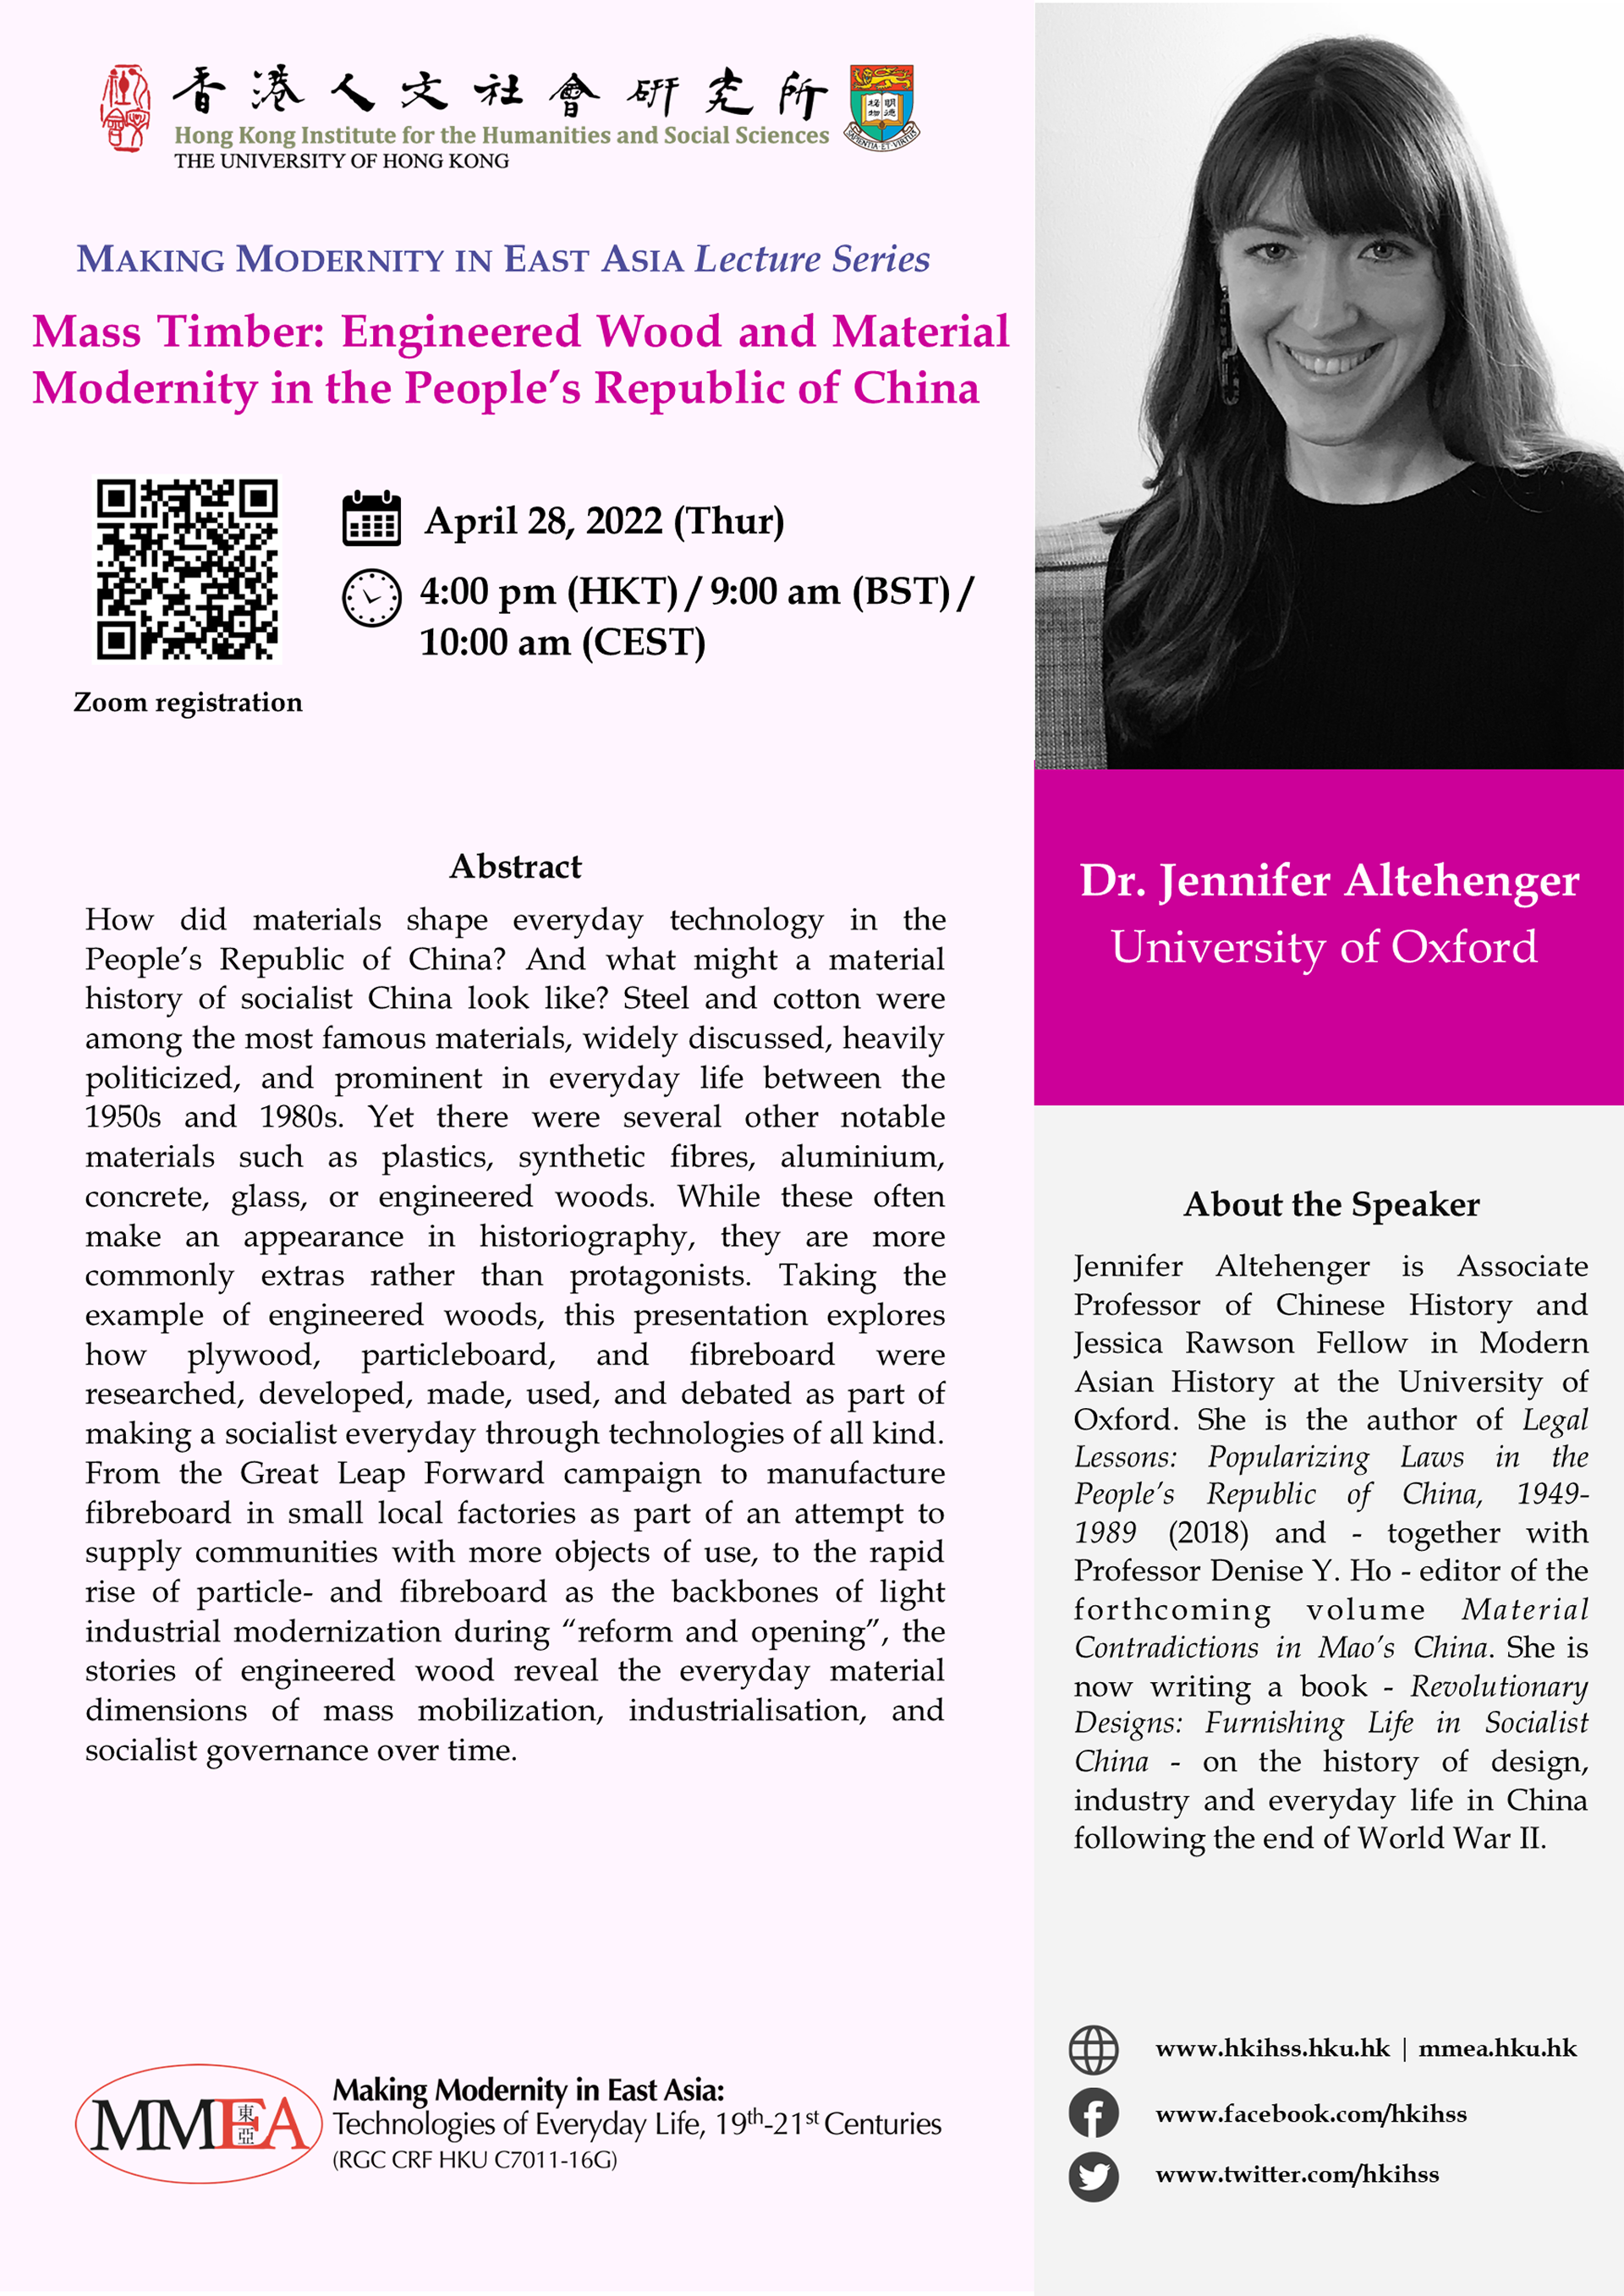 MMEA Lecture Series “Mass Timber: Engineered Wood and Material Modernity in the People’s Republic of China” by Dr. Jennifer Altehenger (April 28, 2022)